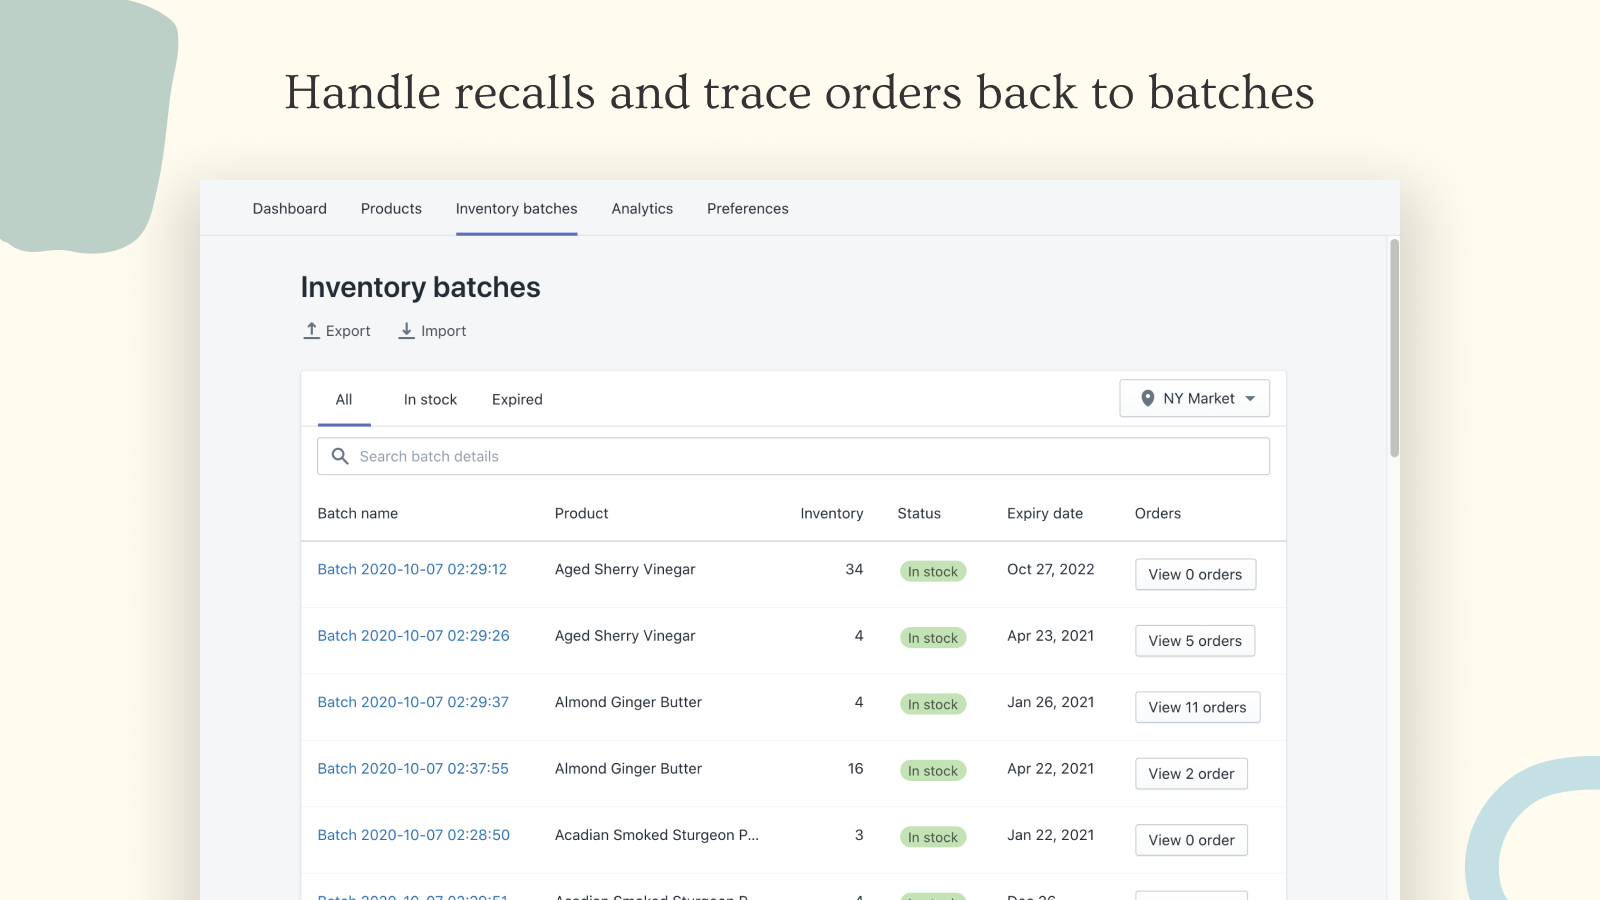 Handle recalls and trace orders back to batches